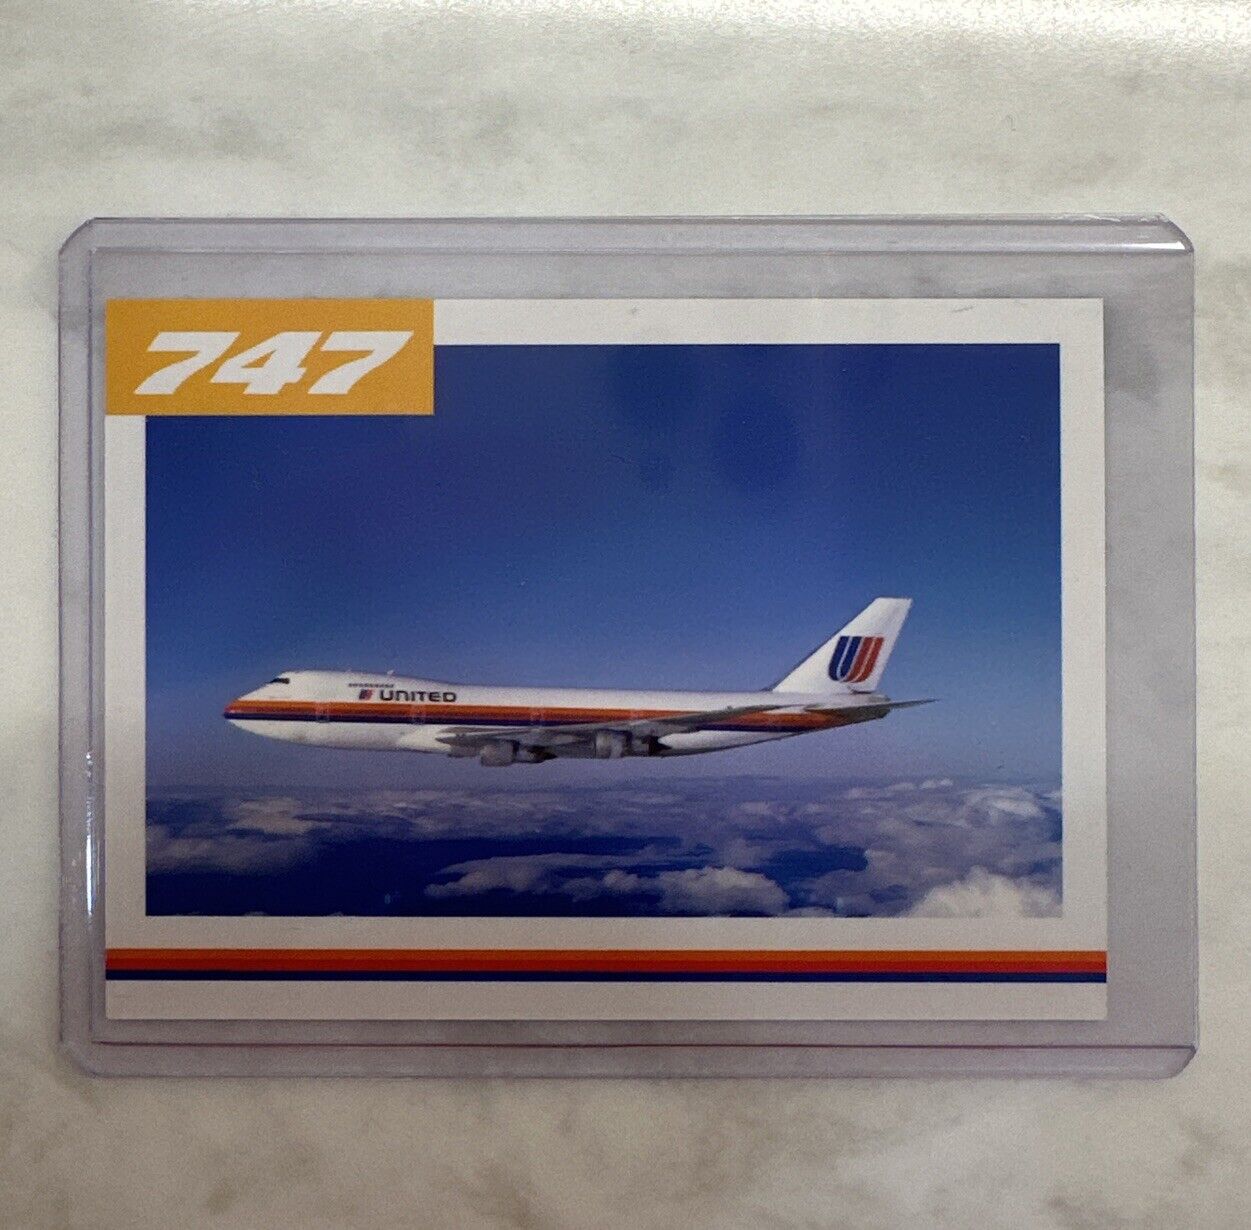 UNITED AIRLINES PILOT TRADING CARD 747-200 Saul Bass LIVERY 1970s Extreme Rare